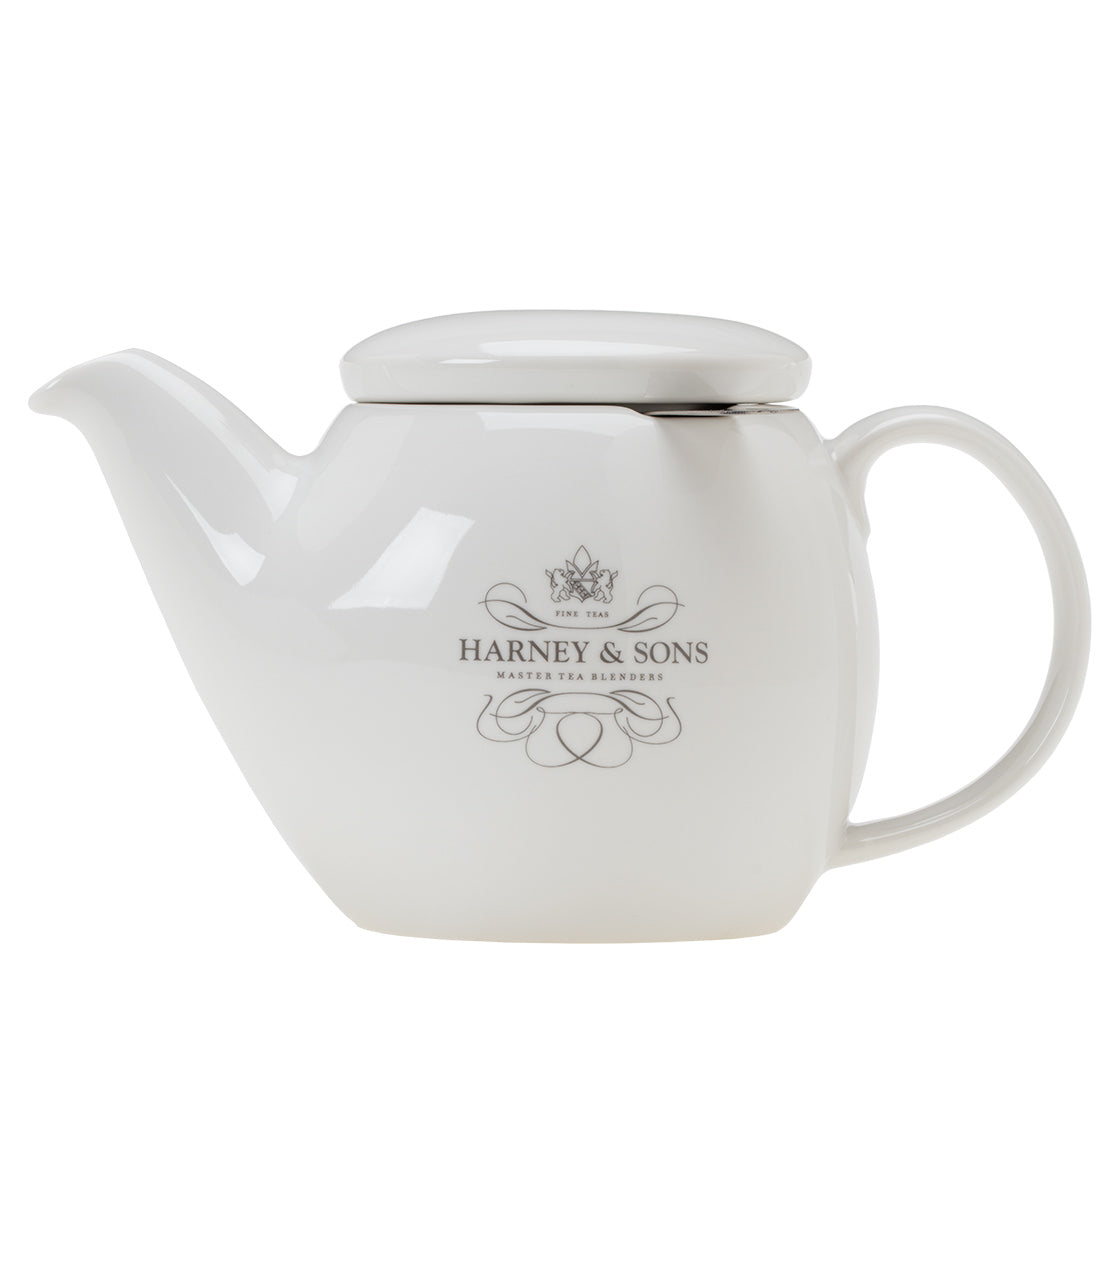 Harney & Sons Teapot with Infuser - 15 oz.  - Harney & Sons Fine Teas